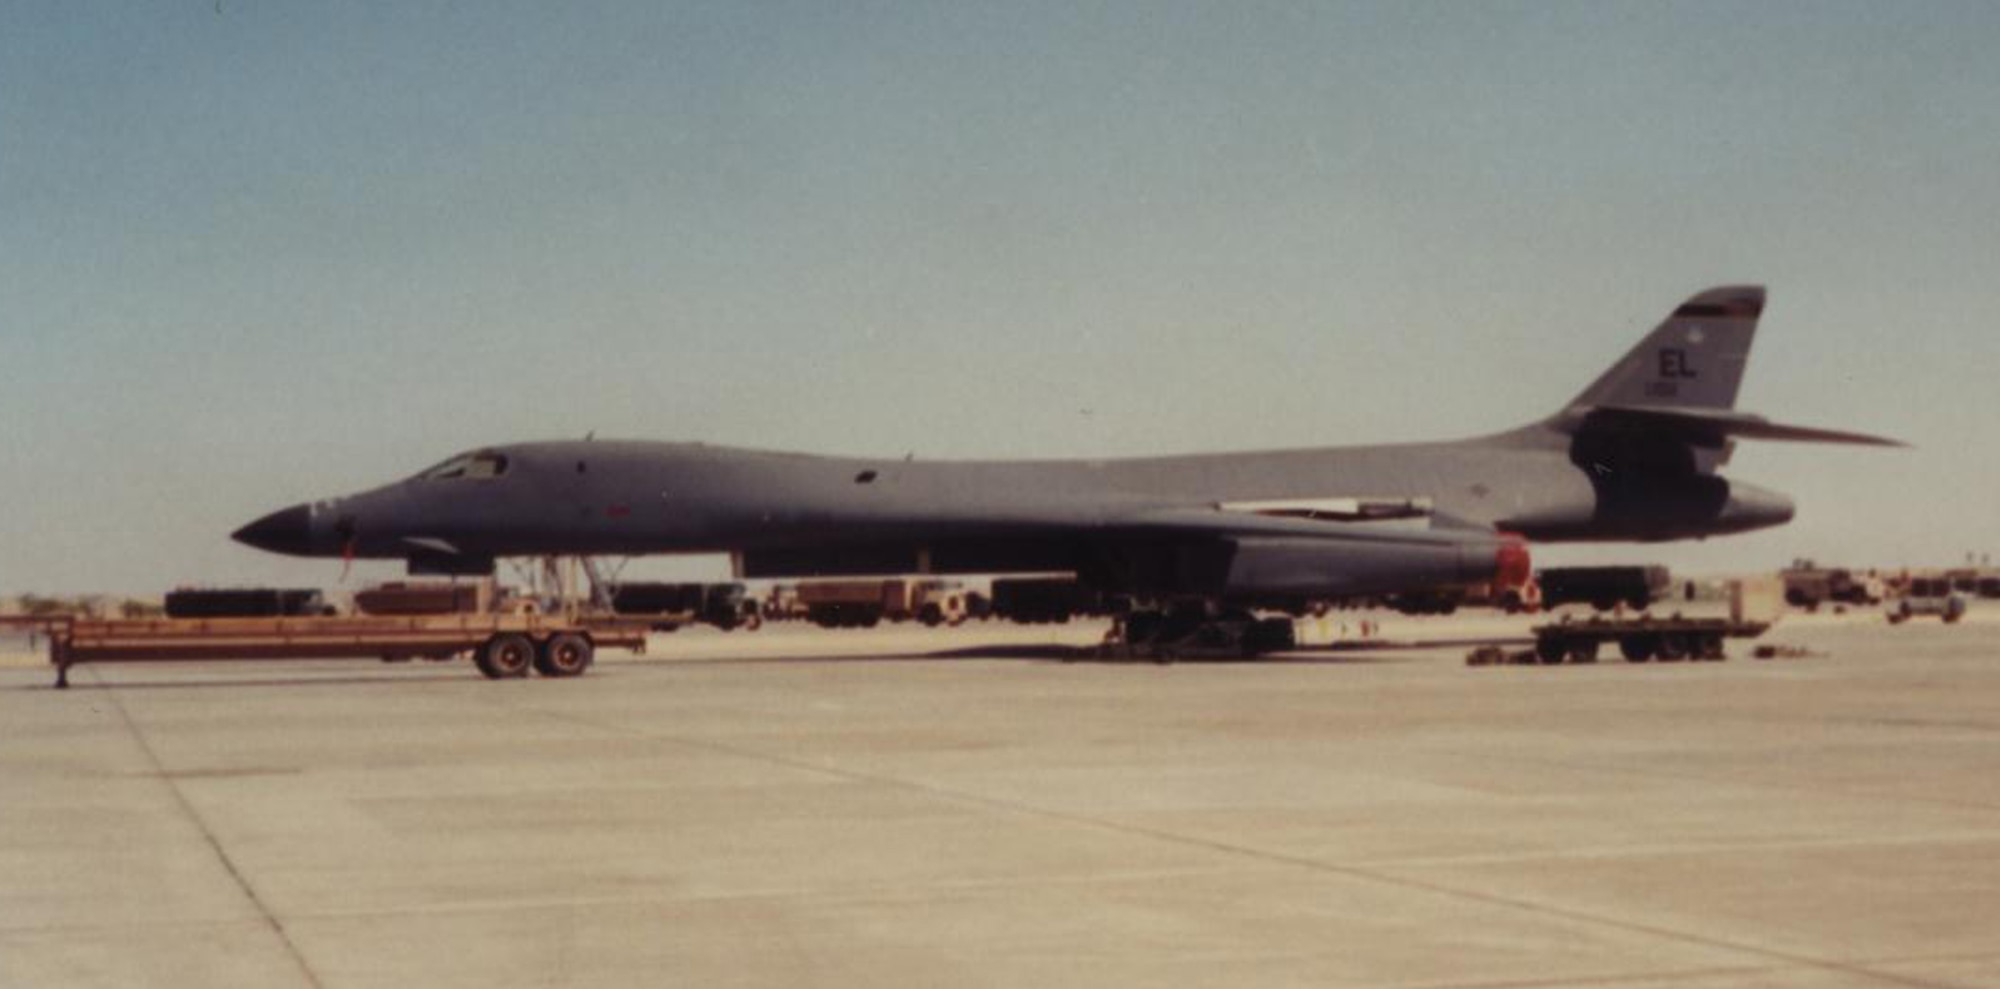 A B-1 bomber stands ready to be loaded with munitions in support of Operation Desert Fox on the flightline at Thumrait Air Base, Oman, December 1998. ODF was a four-day military campaign in response to Iraqi President Saddam Hussein's refusal to comply with United Nations weapons inspectors, and the B-1's operational combat debut. (Lt. Col. John Martin courtesy photo/Released)